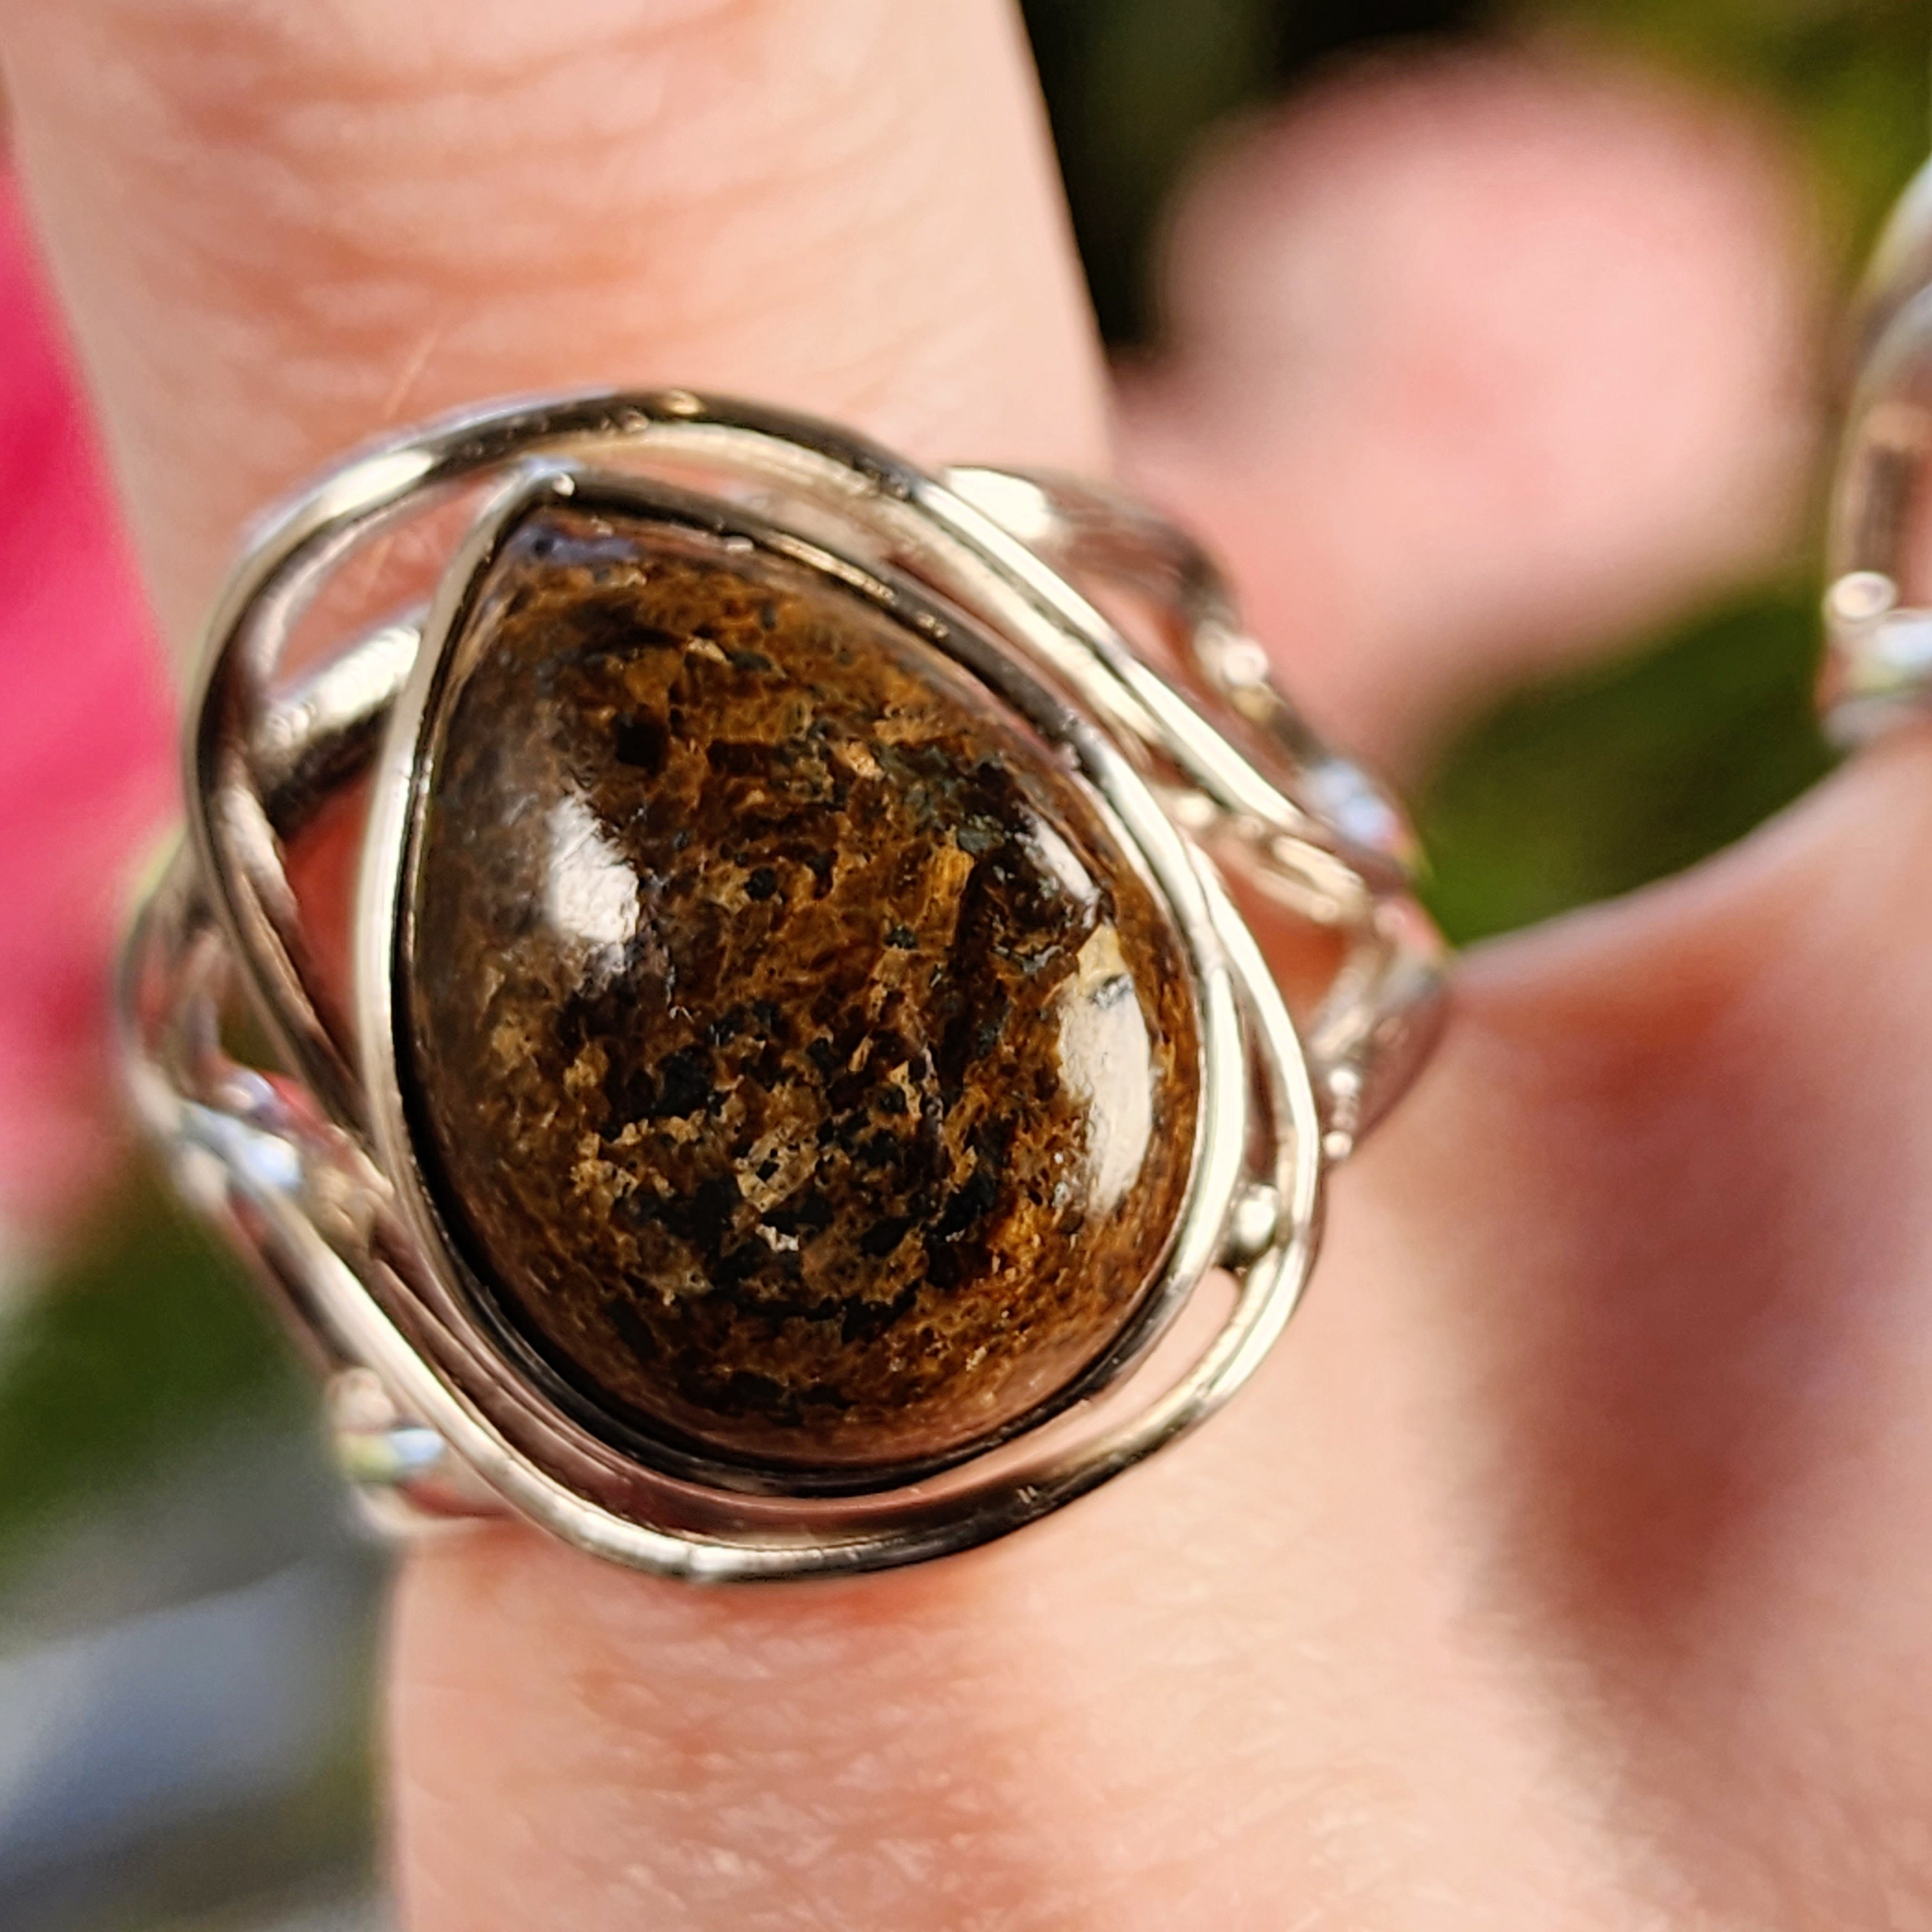 Bronzite Finger Cuff Adjustable Ring .925 Sterling Silver for Achieving Success, Manifestation and Justice